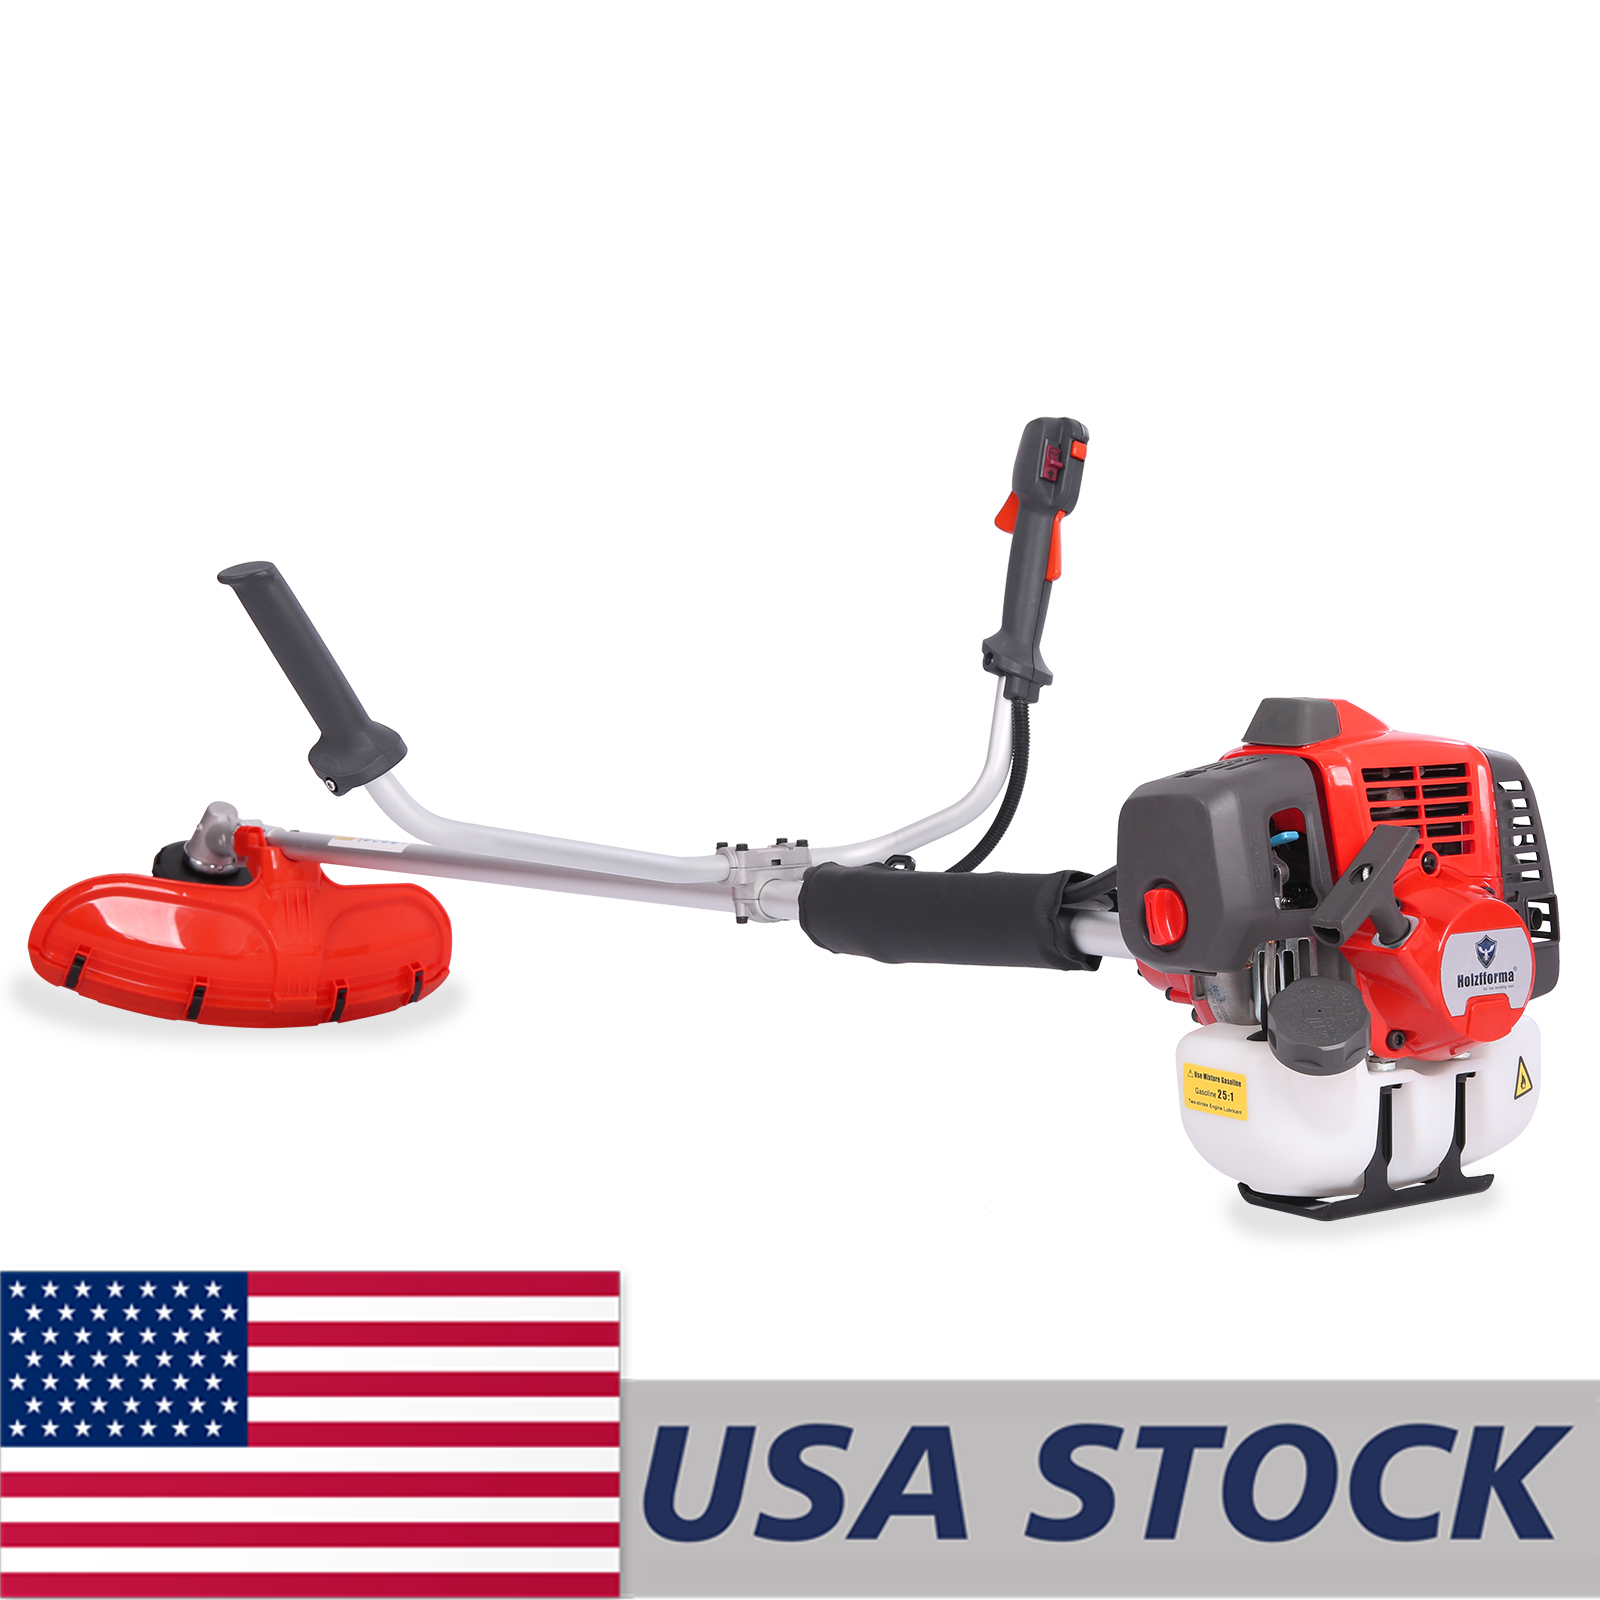 US STOCK - 41.5cc Holzfforma FF541R PRO Brush Cutter Assembly With Drive tube Handle bar Trimmer blade (without trimmer head) Full harness Produced By Farmertec All Parts Are Compatible With Husq 541R 2-4 Days Delivery Time Fast Shipping For US Customers Only